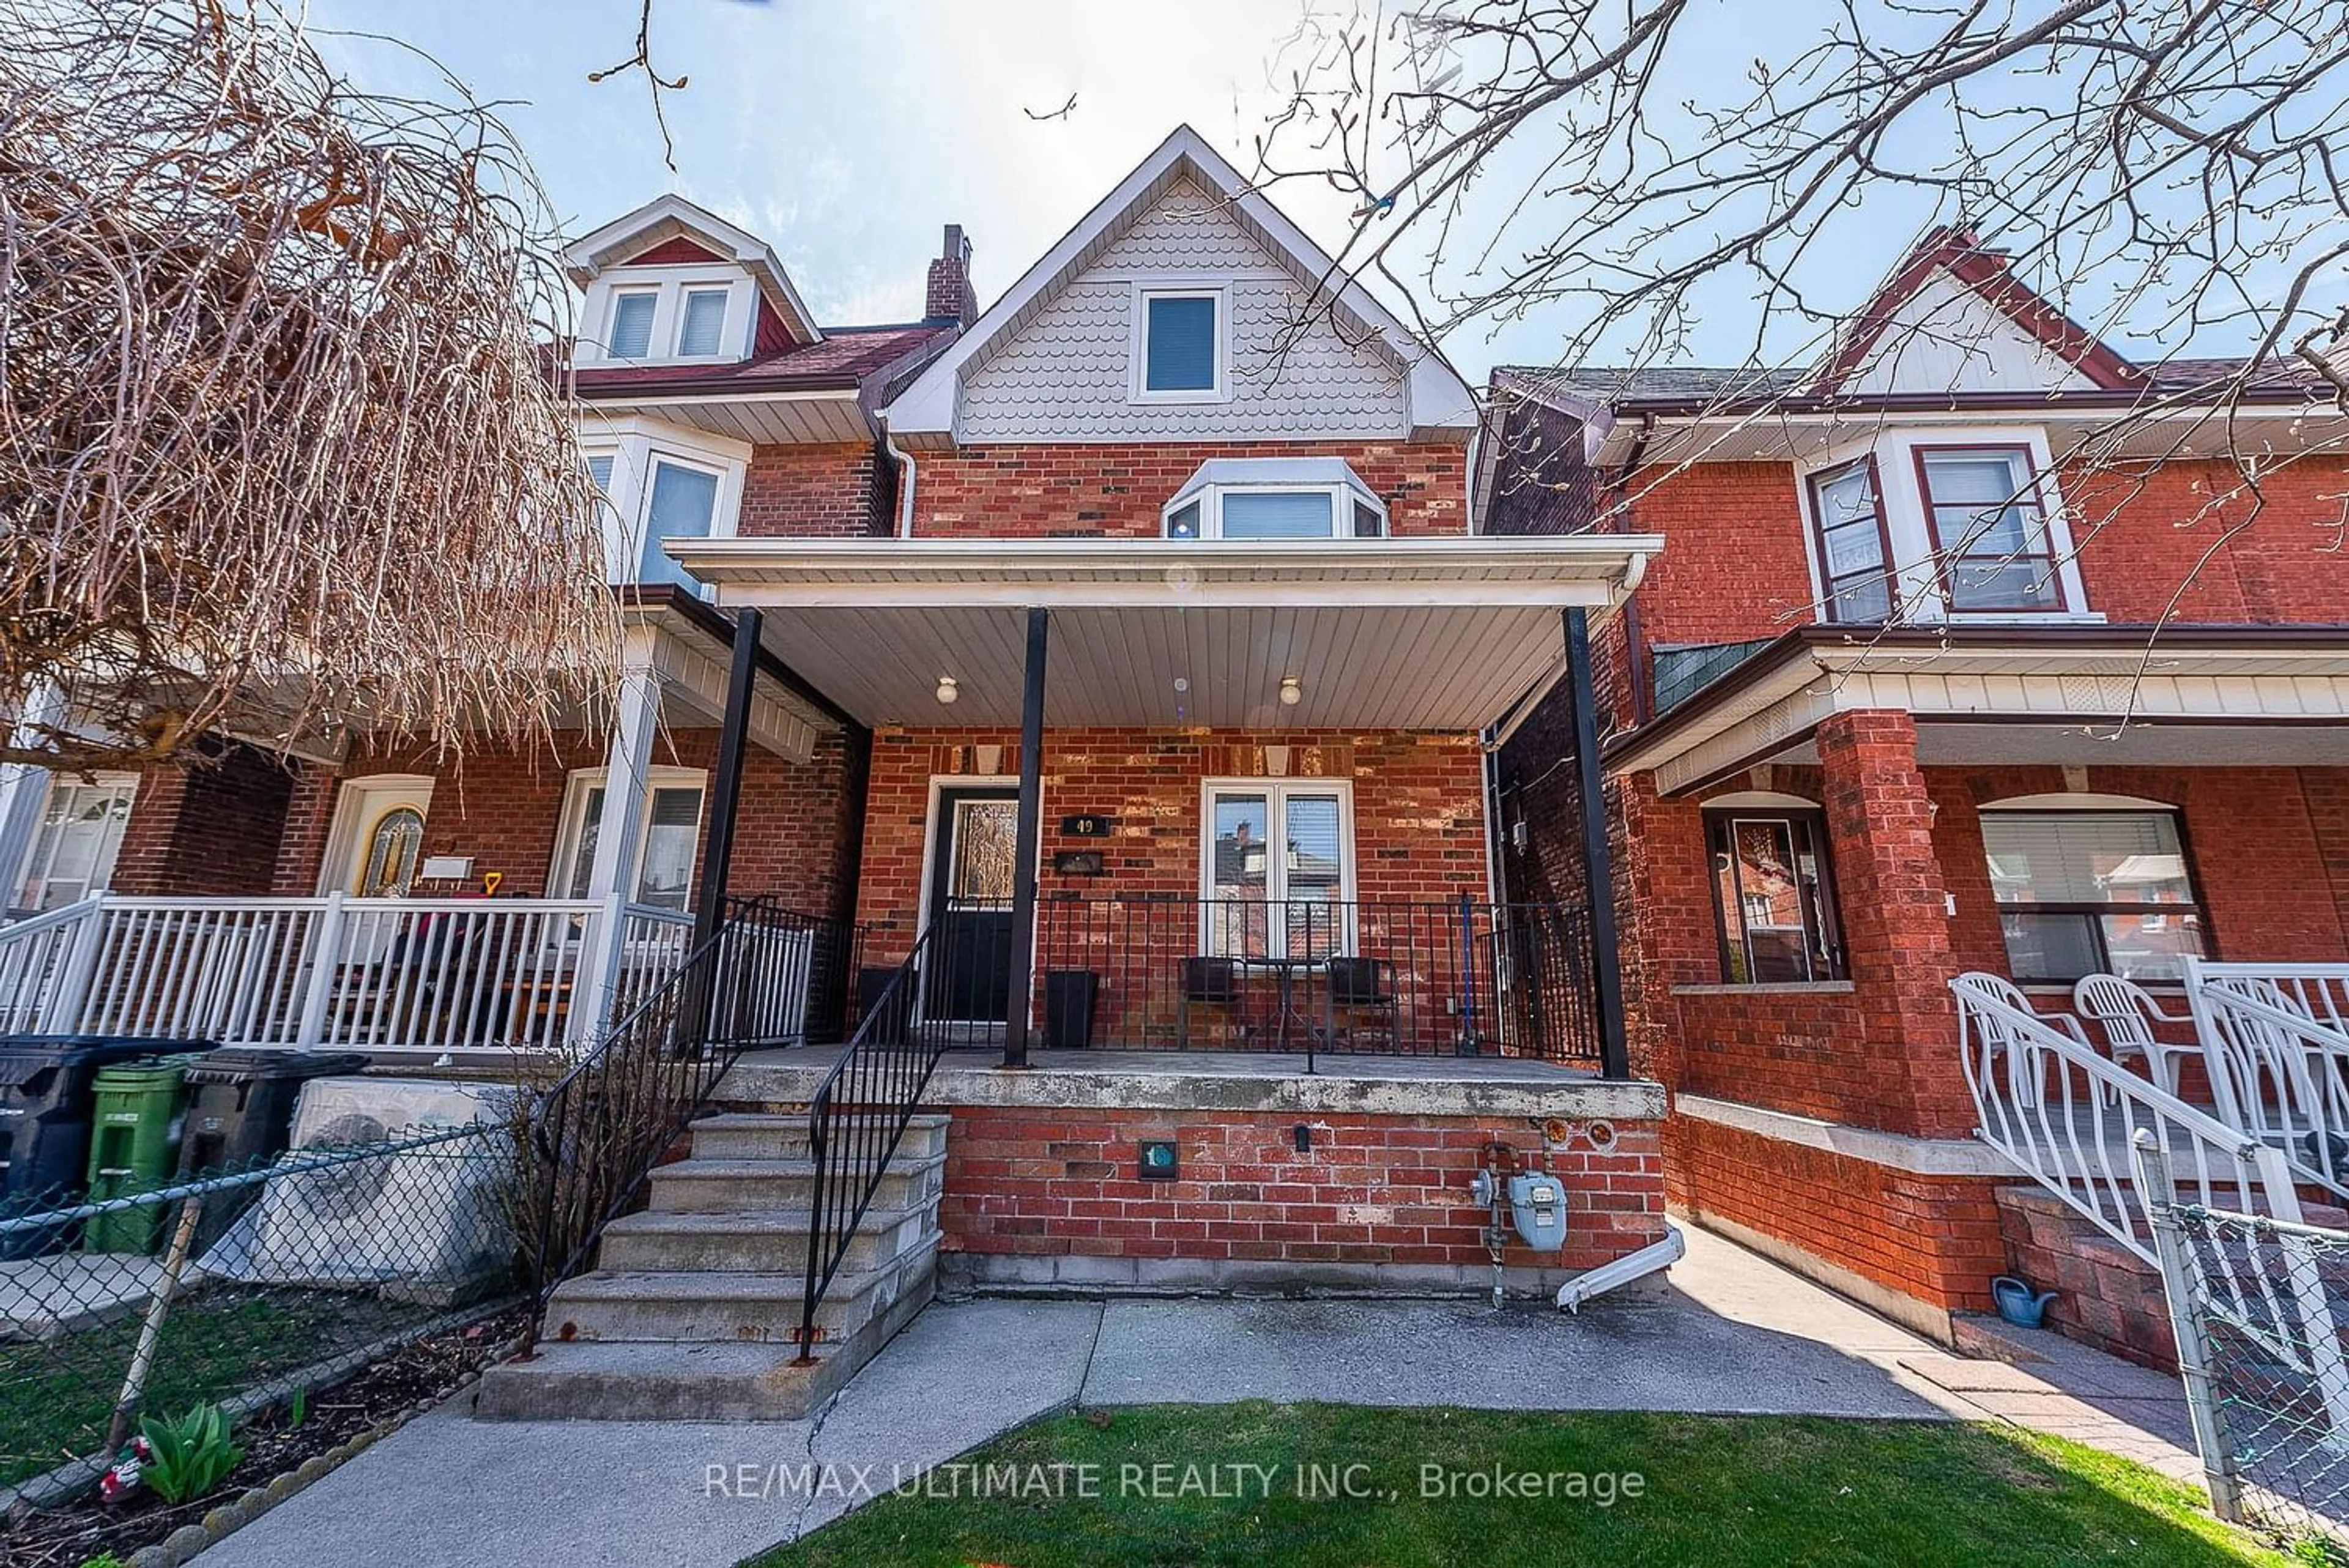 Home with brick exterior material for 49 Millicent St, Toronto Ontario M6H 1W3